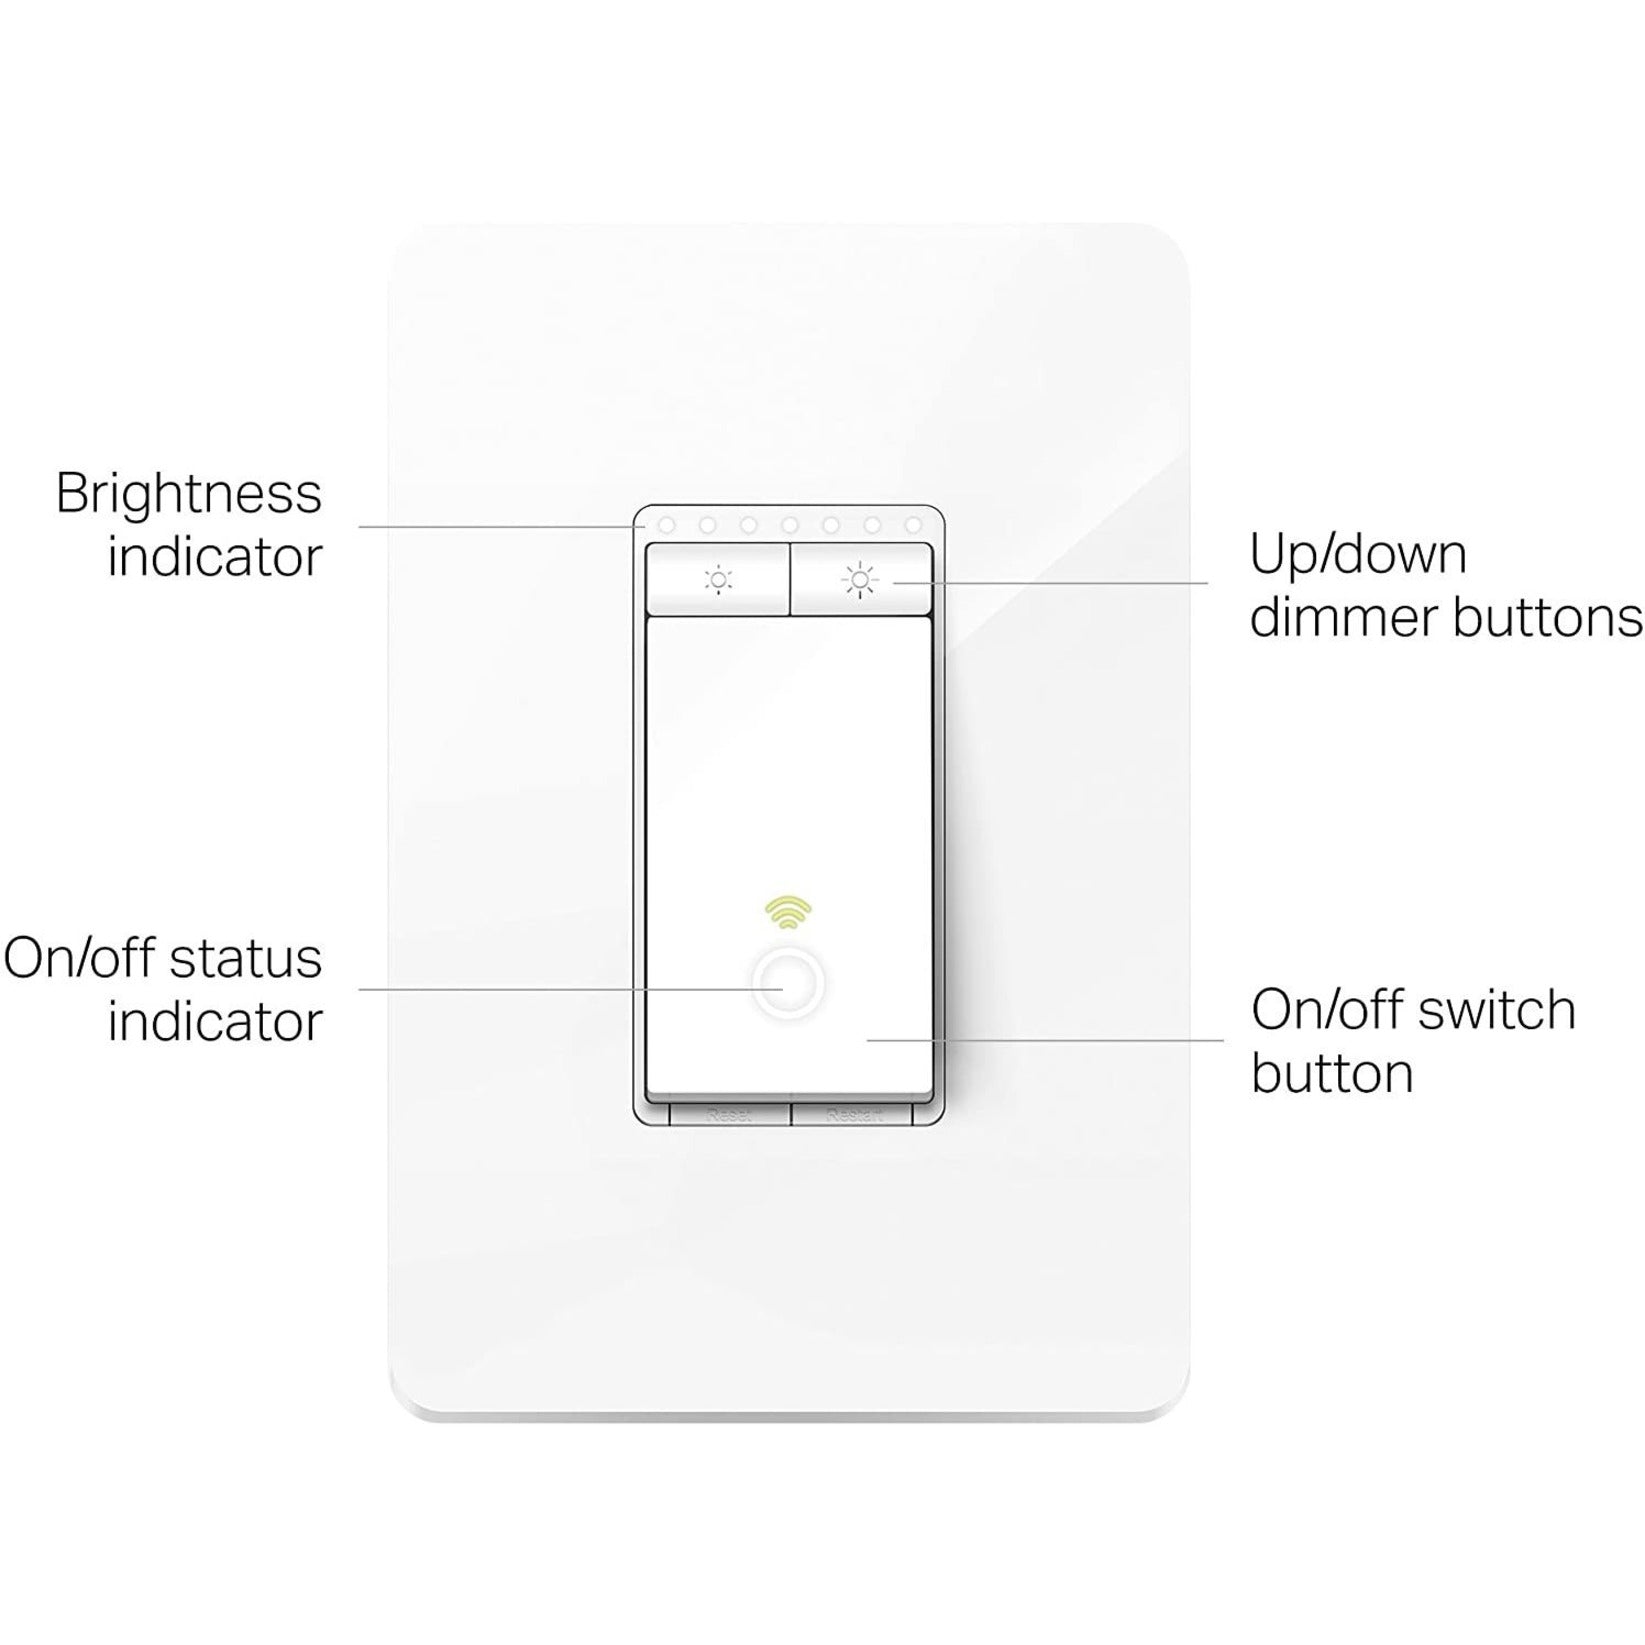 Kasa Smart HS220 Wi-Fi Light Switch, Dimmer - Control Your Home Lighting with Ease